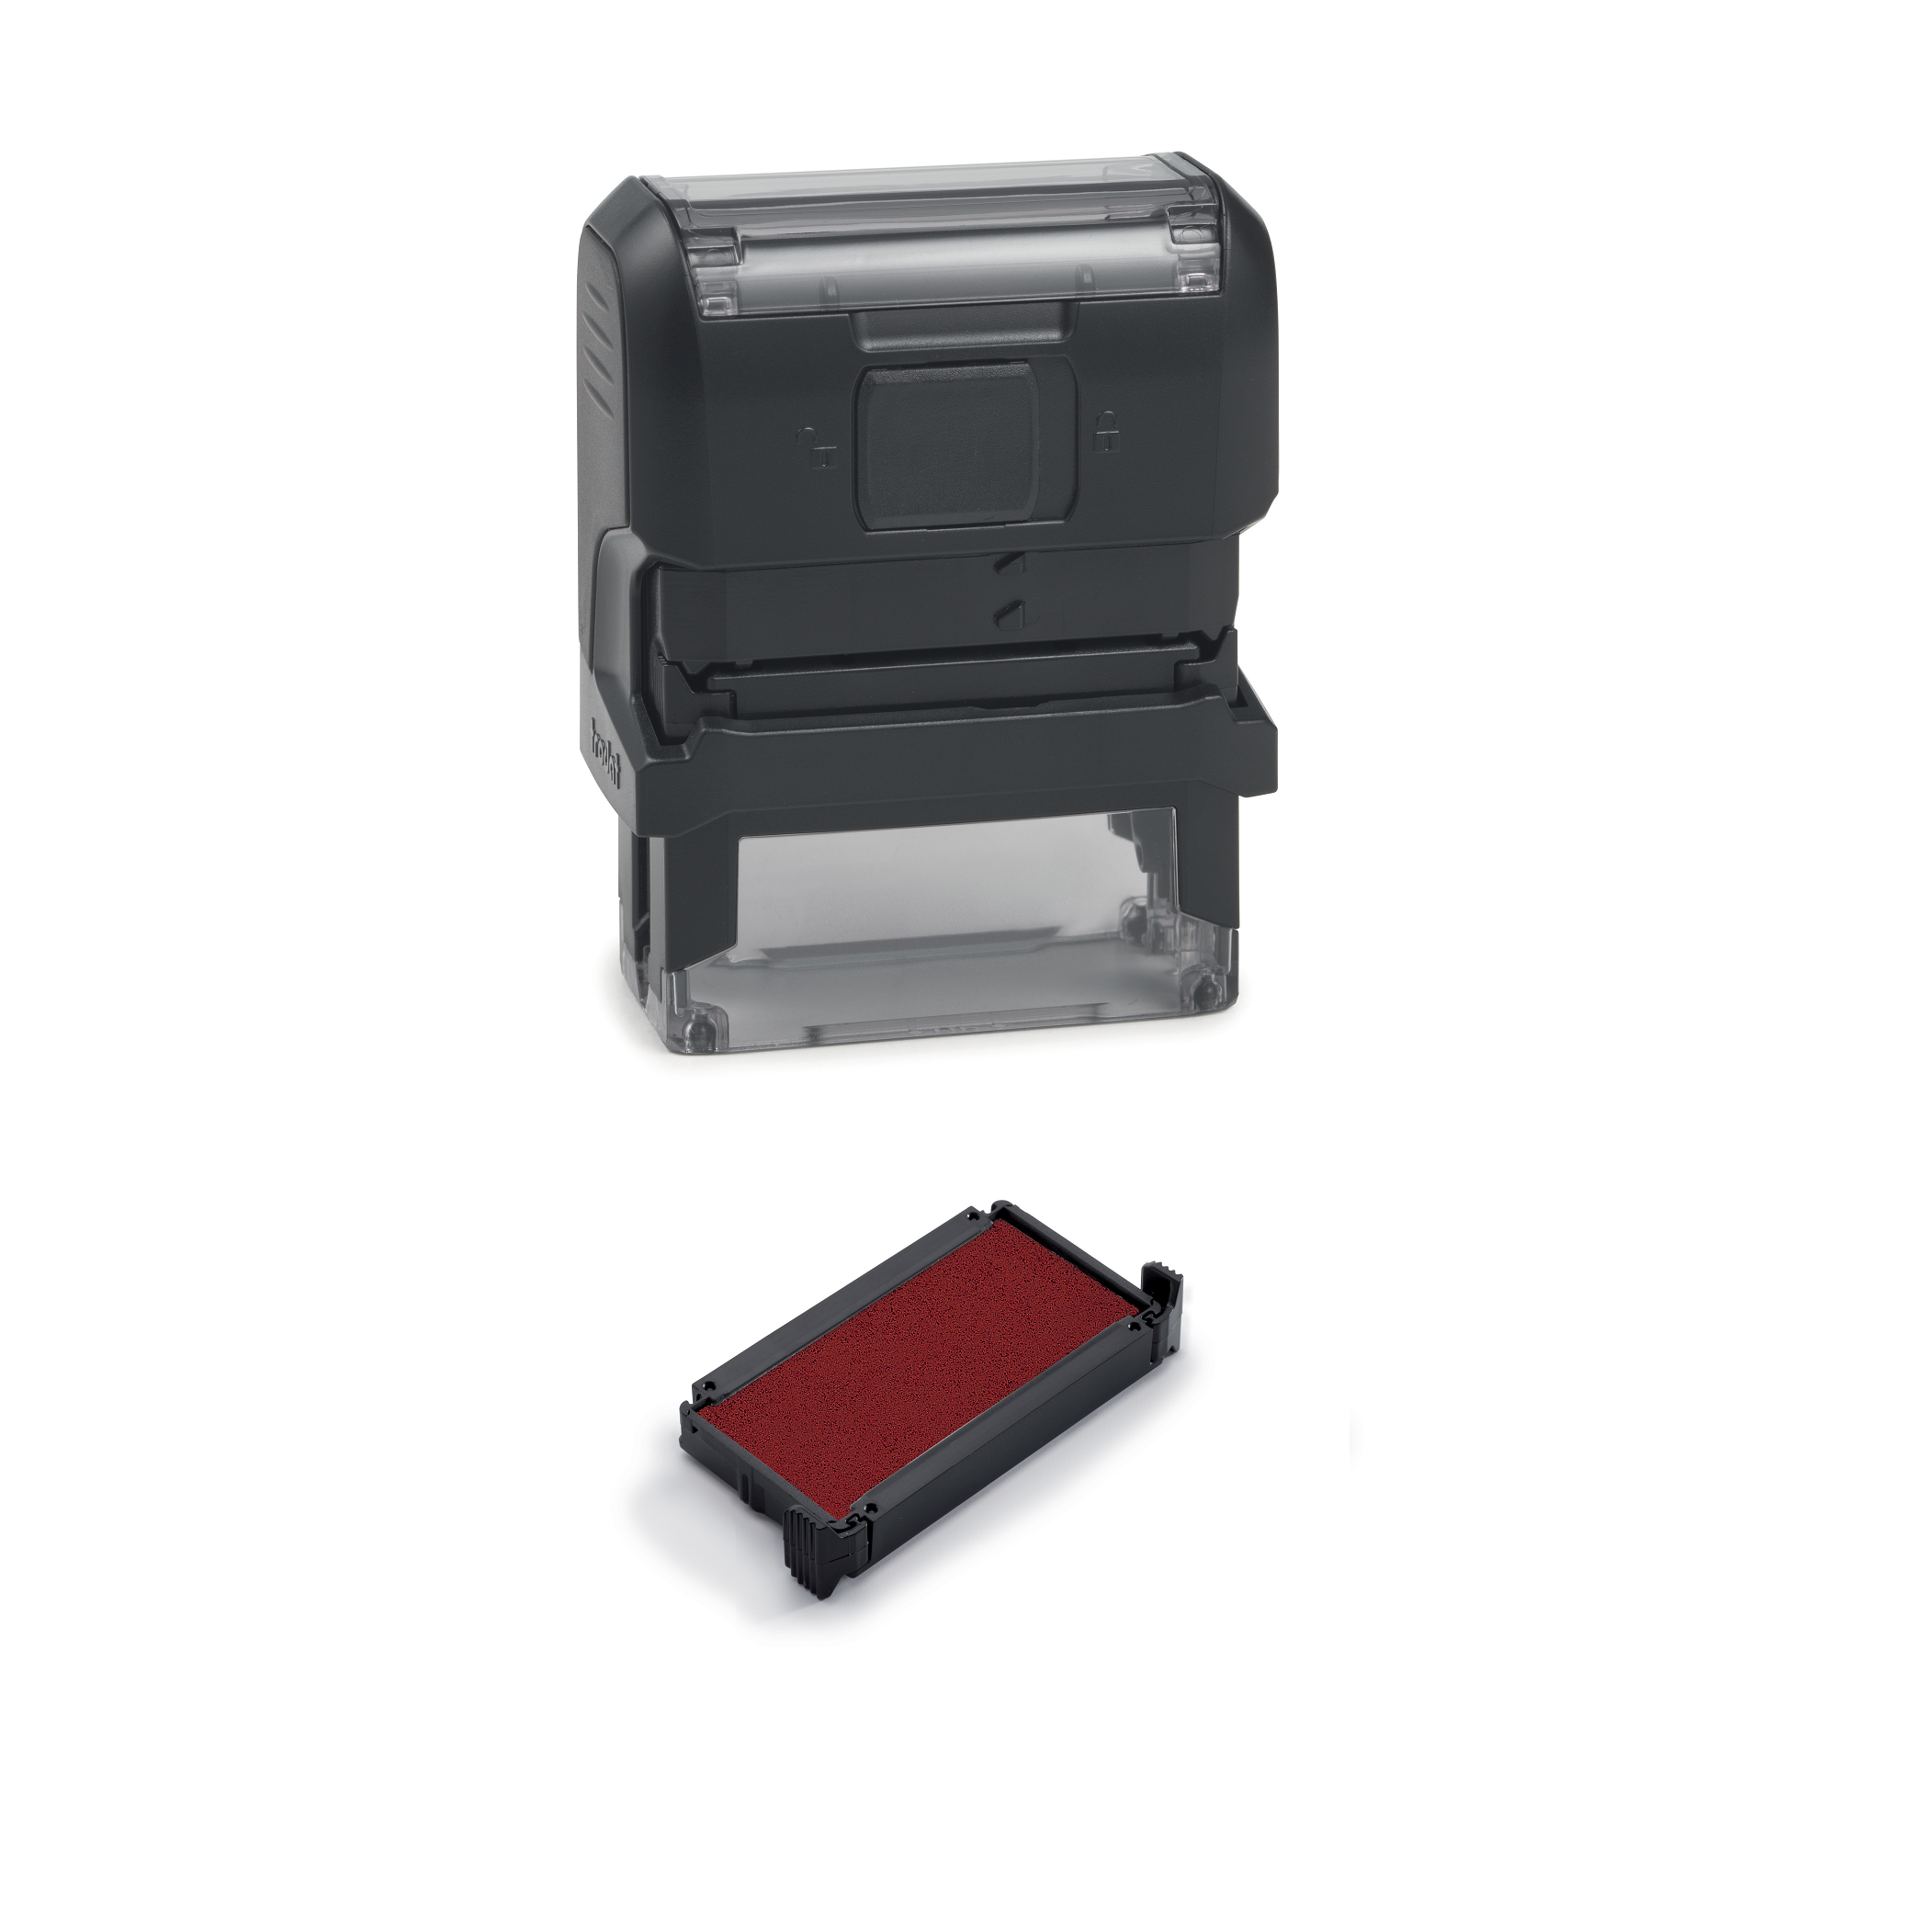 Action Required Teacher Self Inking Rubber Stamp